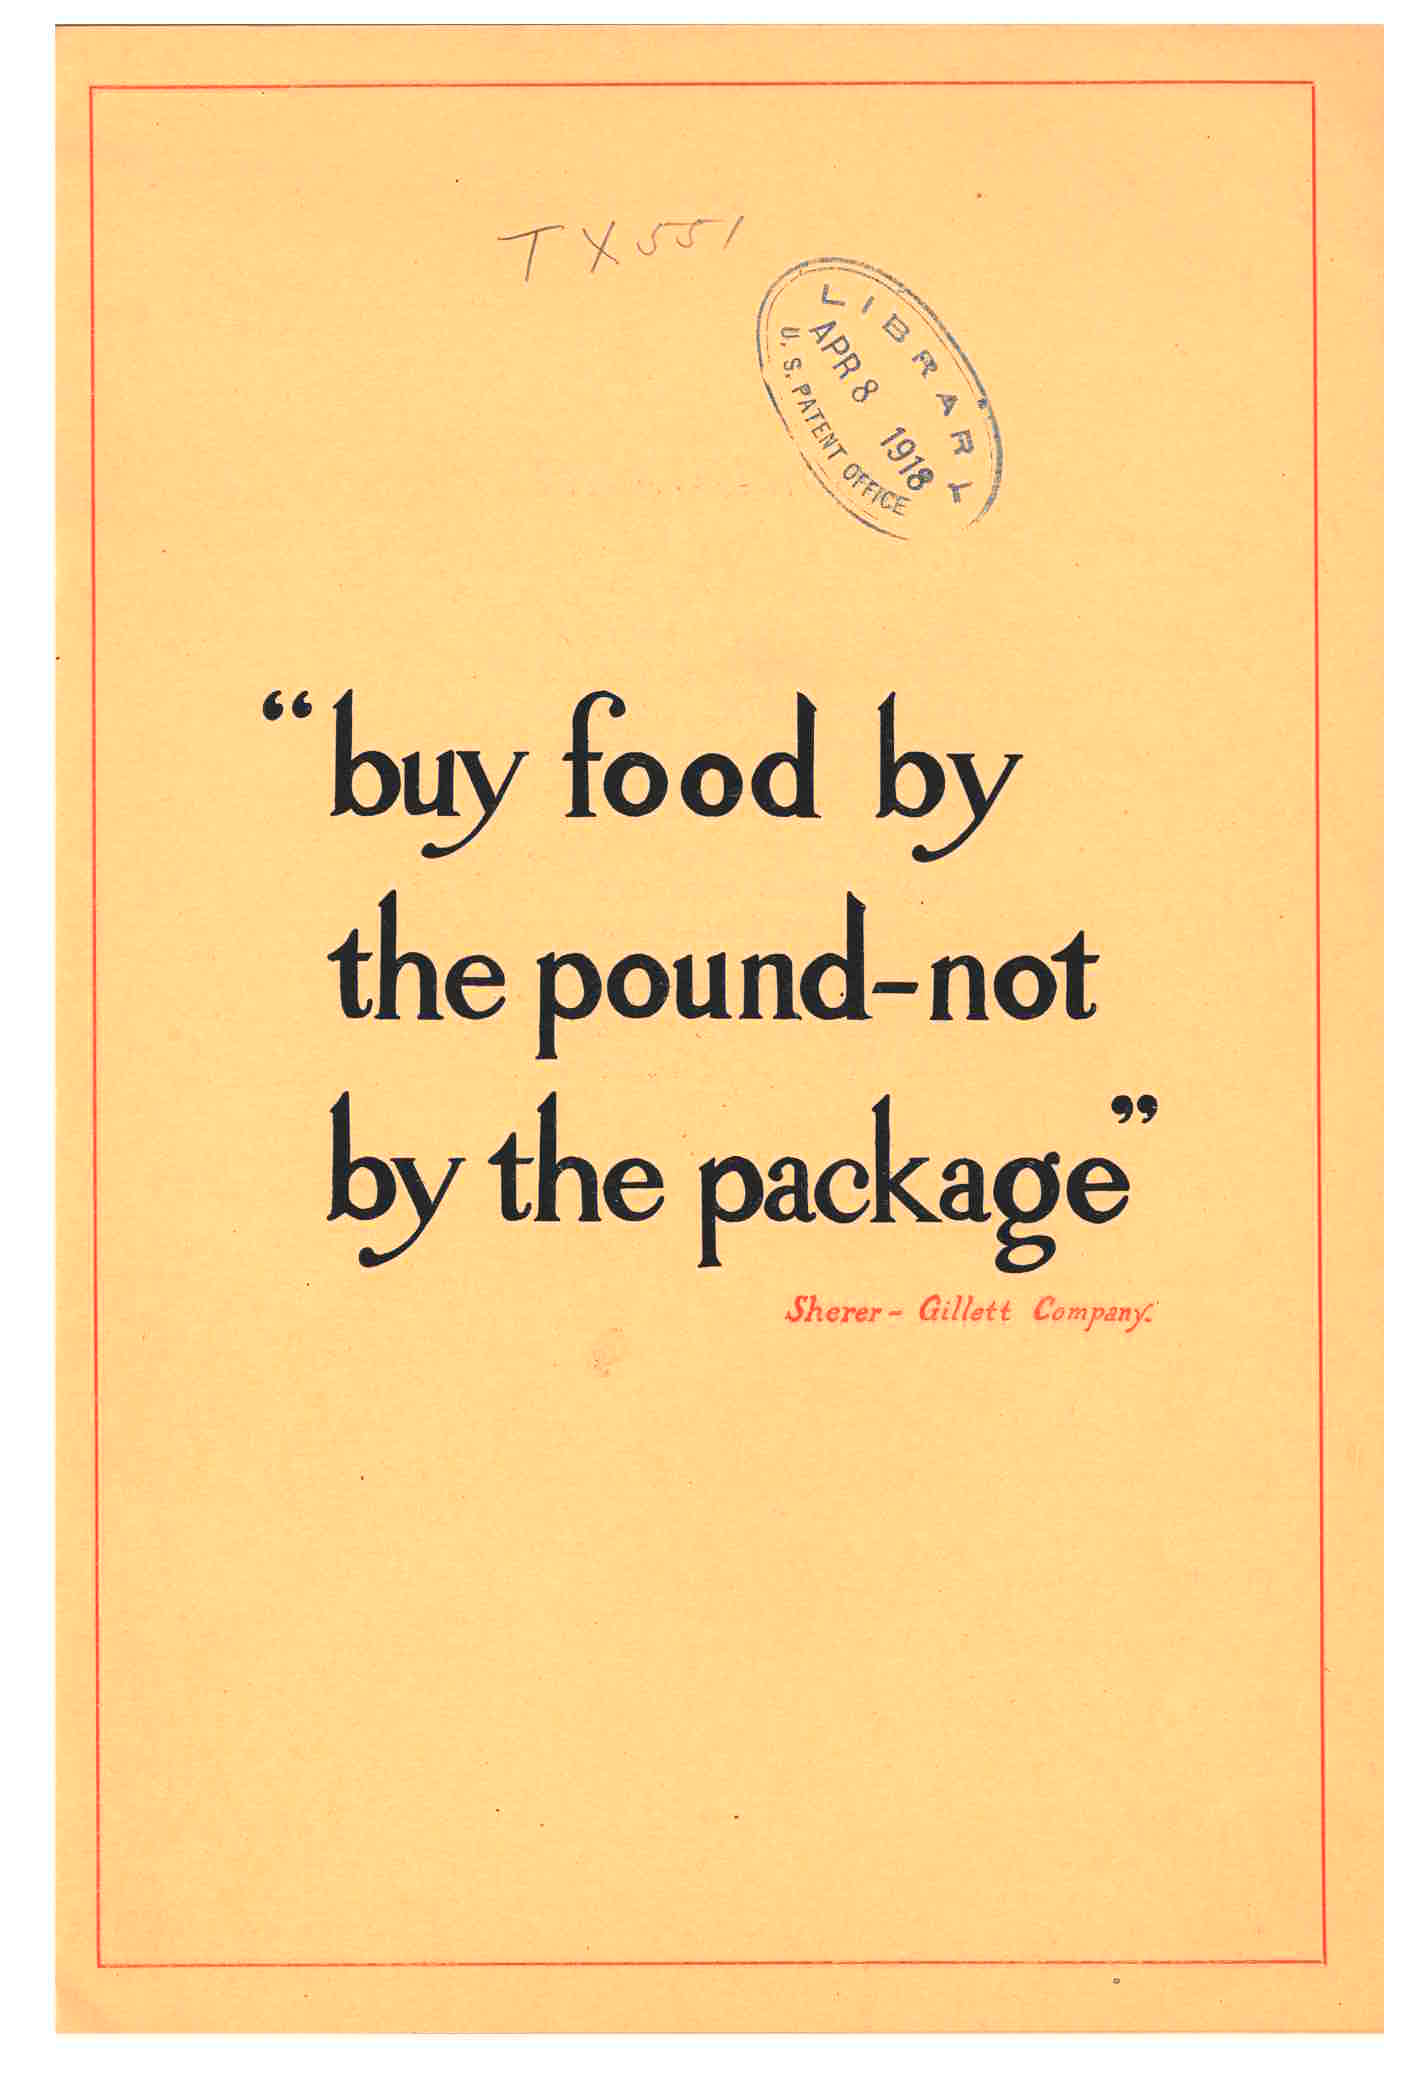 a quote: "buy food by the pound-not by the package"